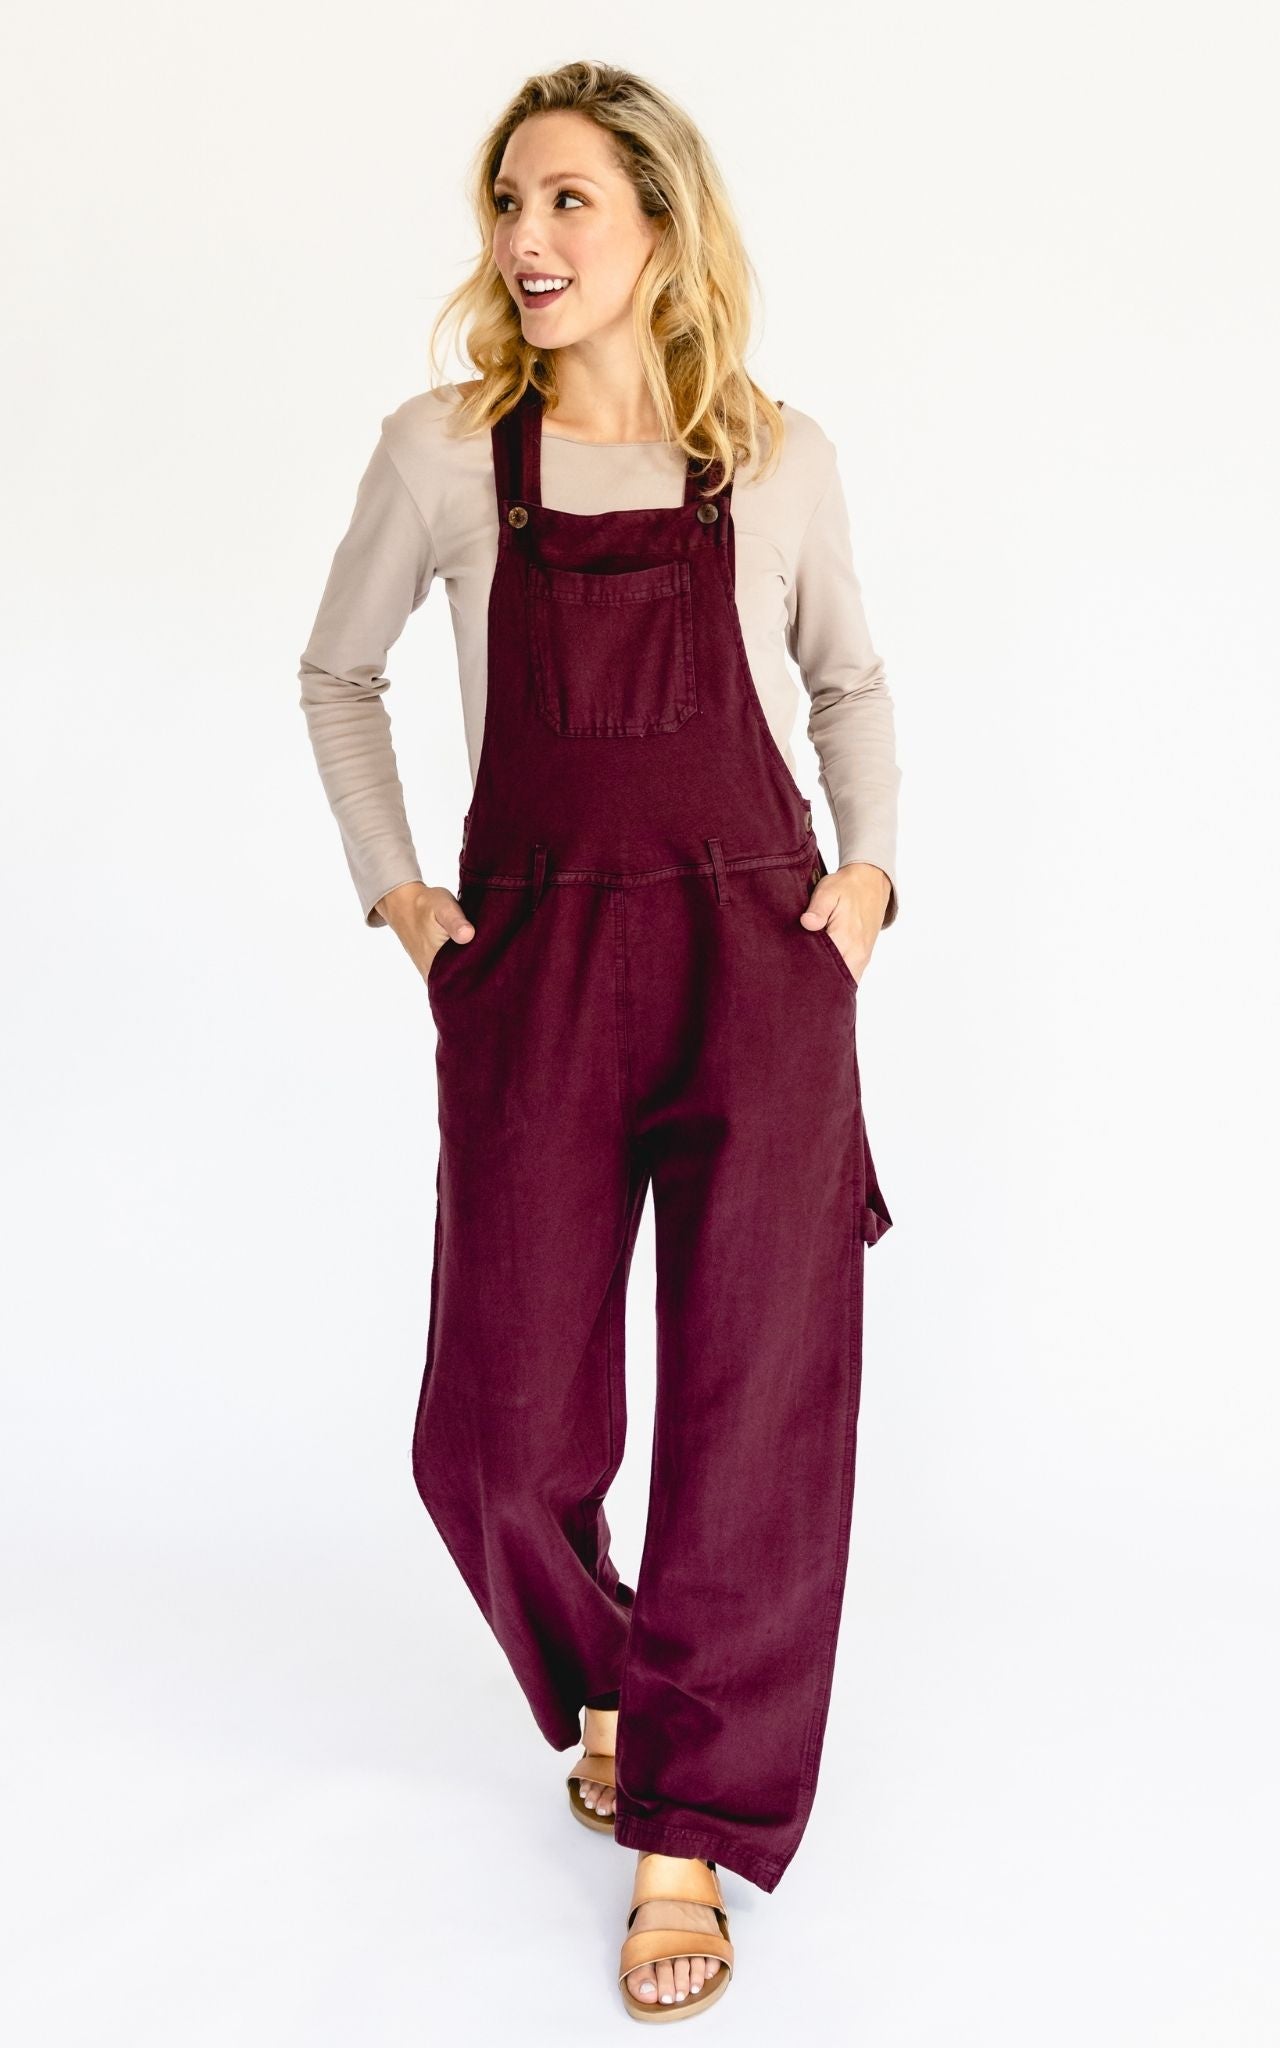 Surya Australia Ethical Cotton Straight Leg Overalls (Dungarees) from Nepal - Berry